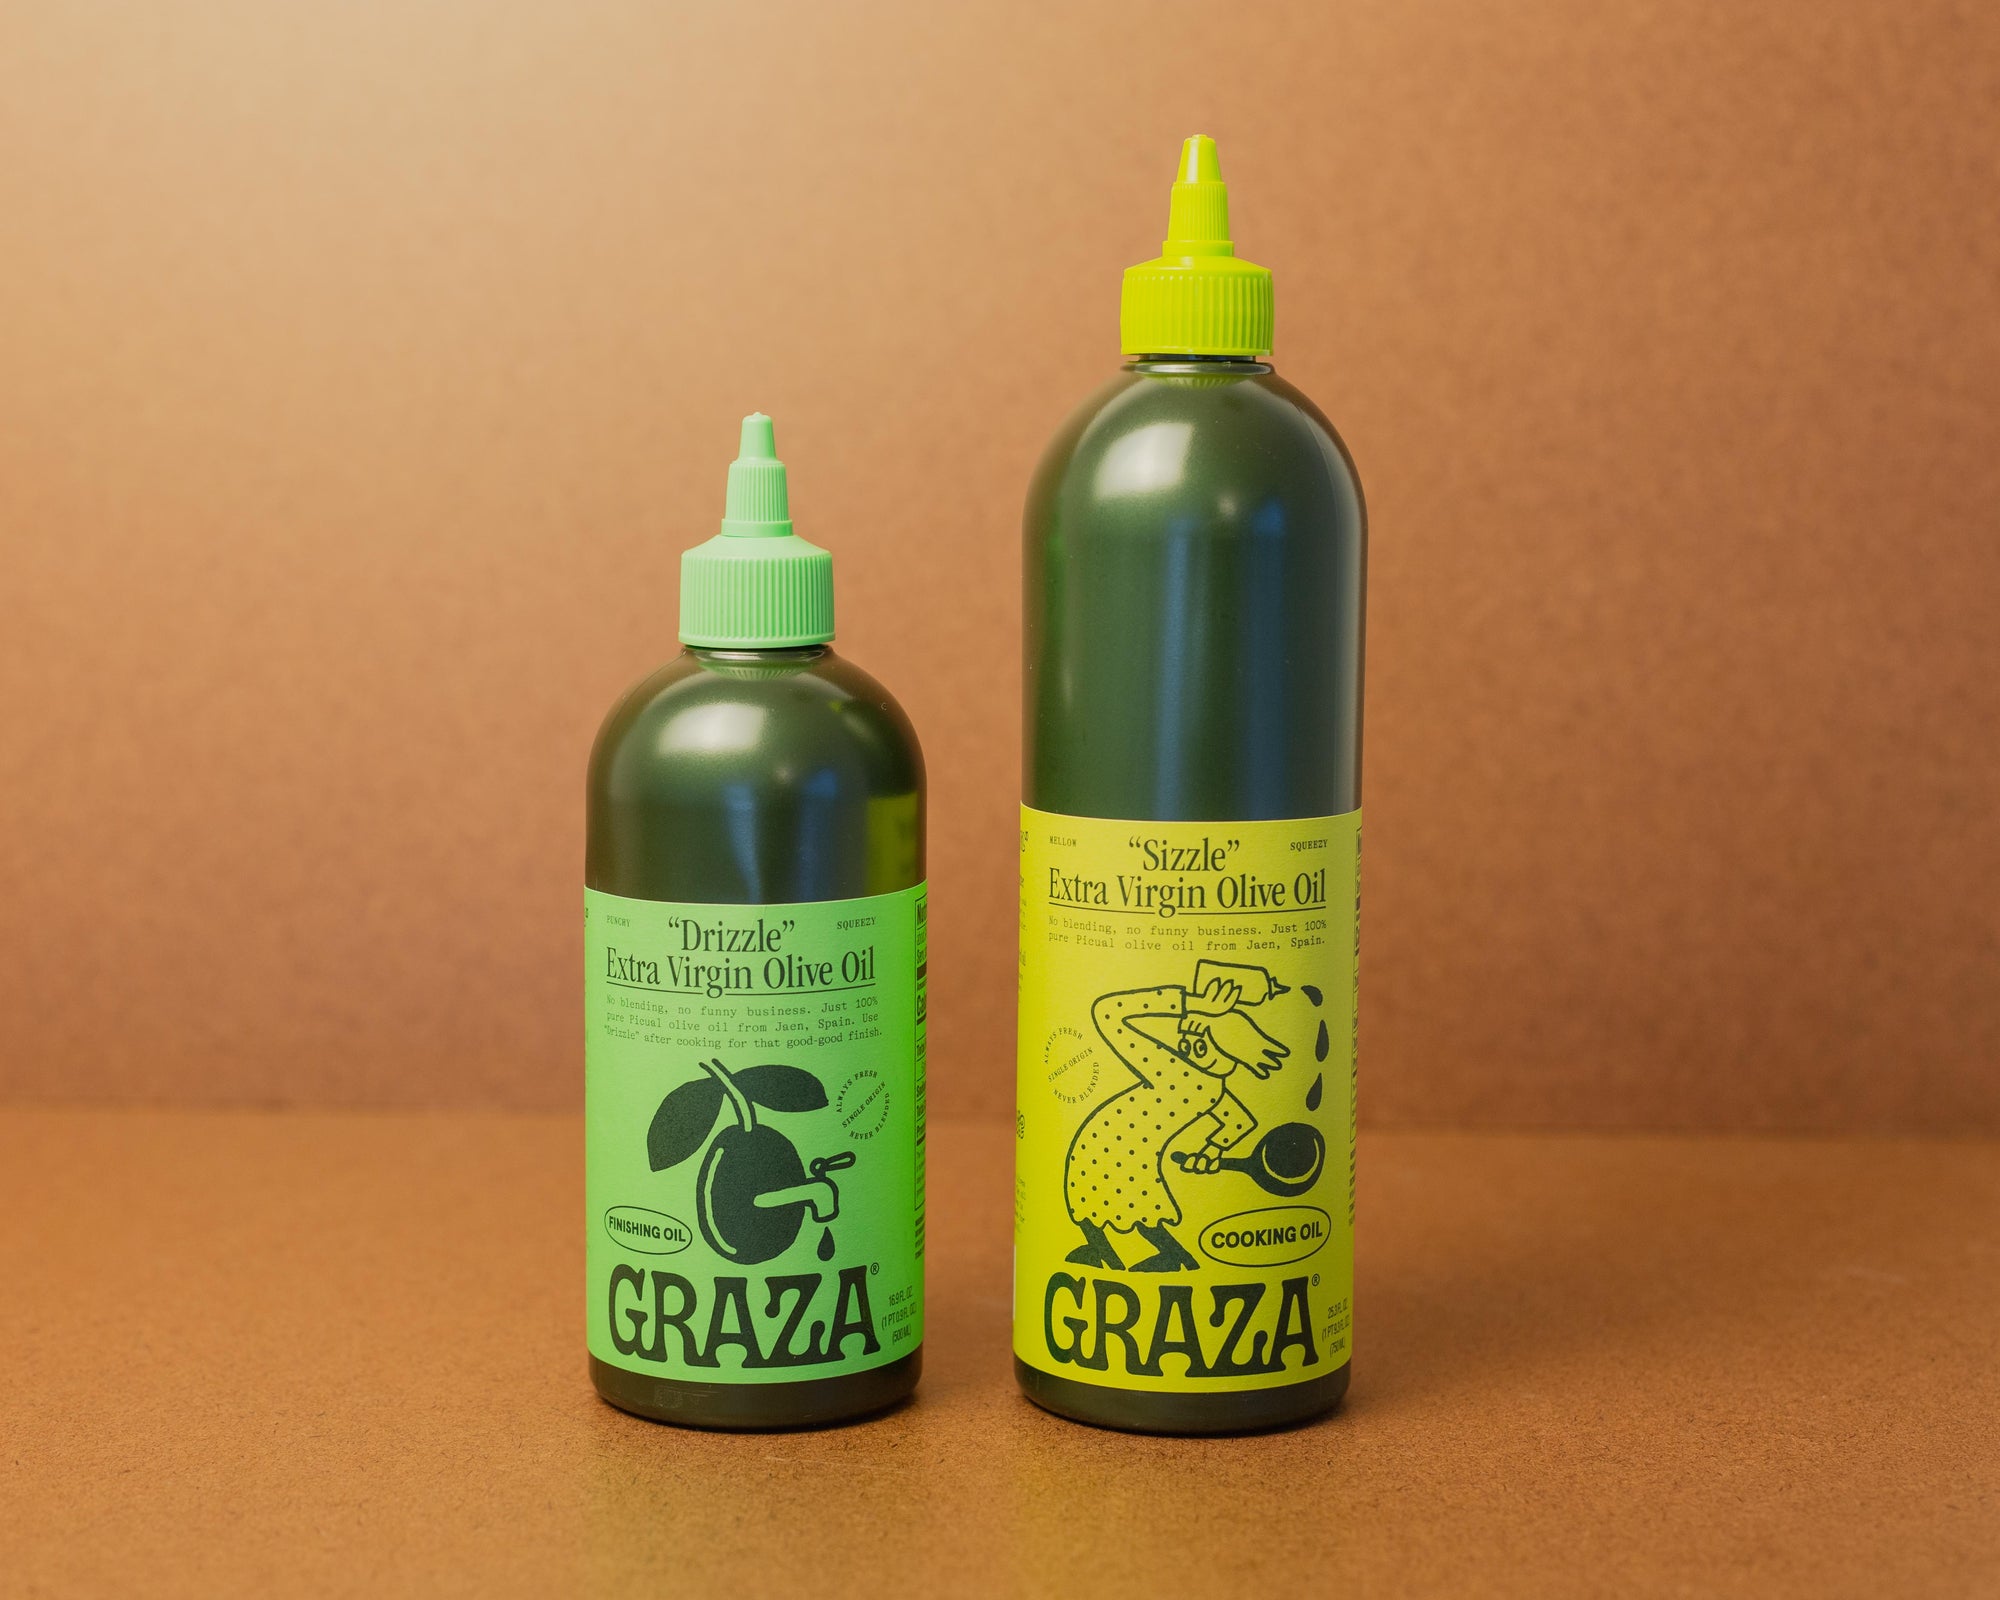 Graza "Drizzle" and "Sizzle" Extra Virgin Olive Oil 